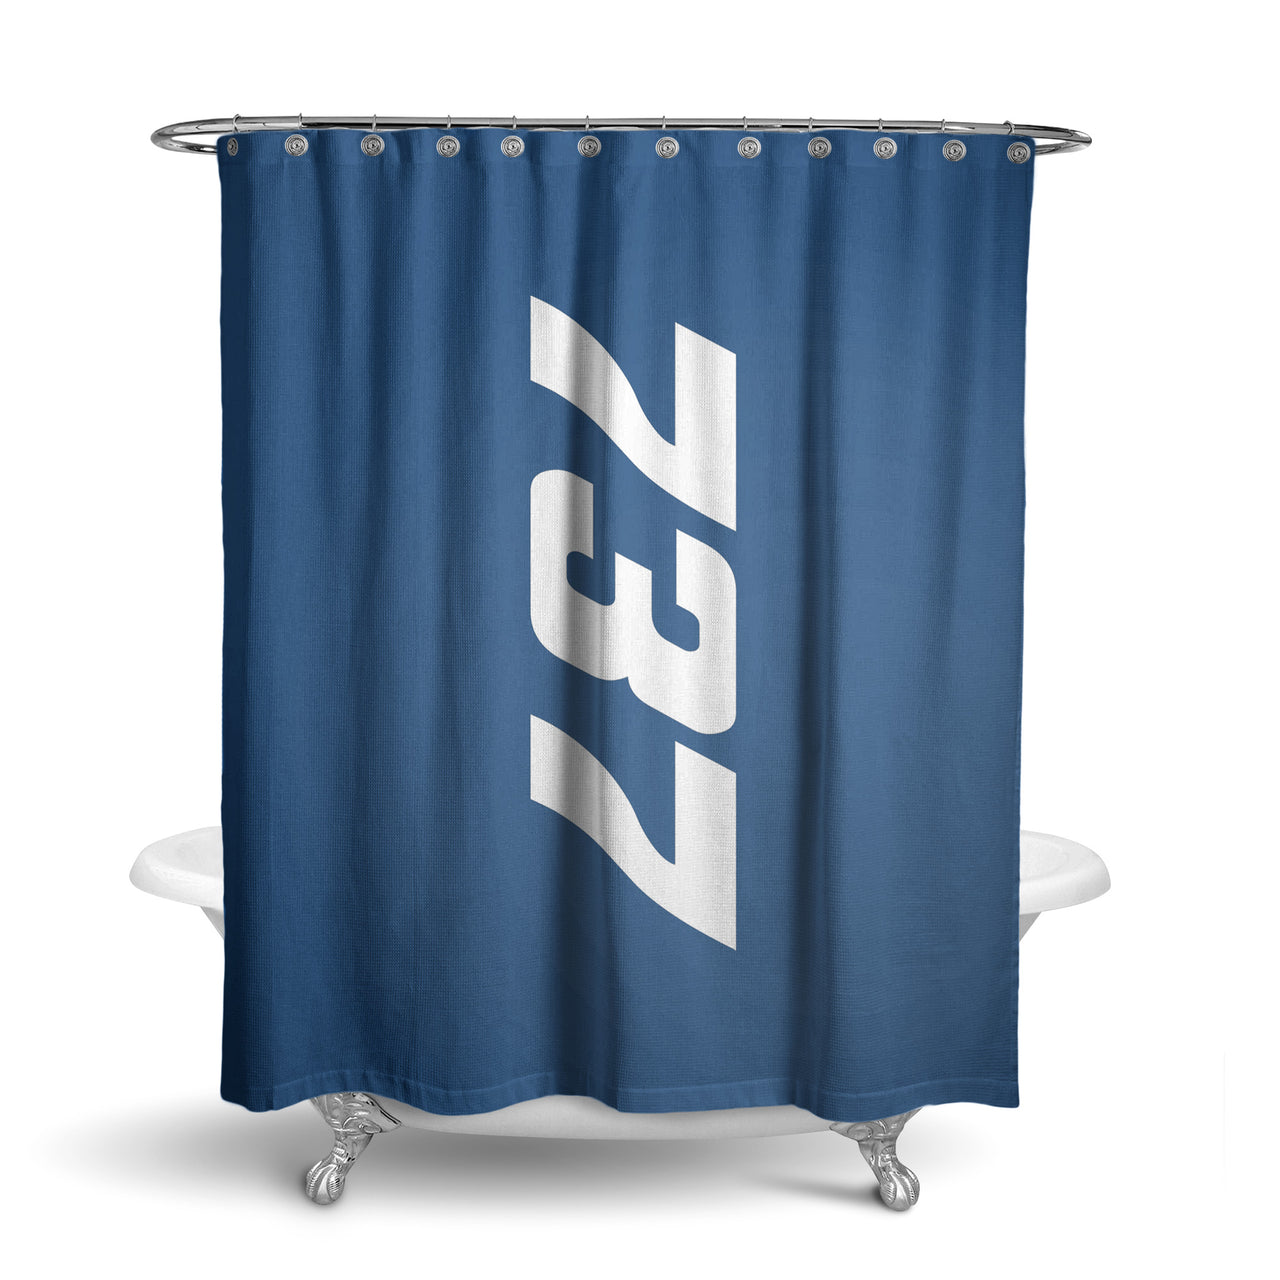 Boeing 737 Text Designed Shower Curtains